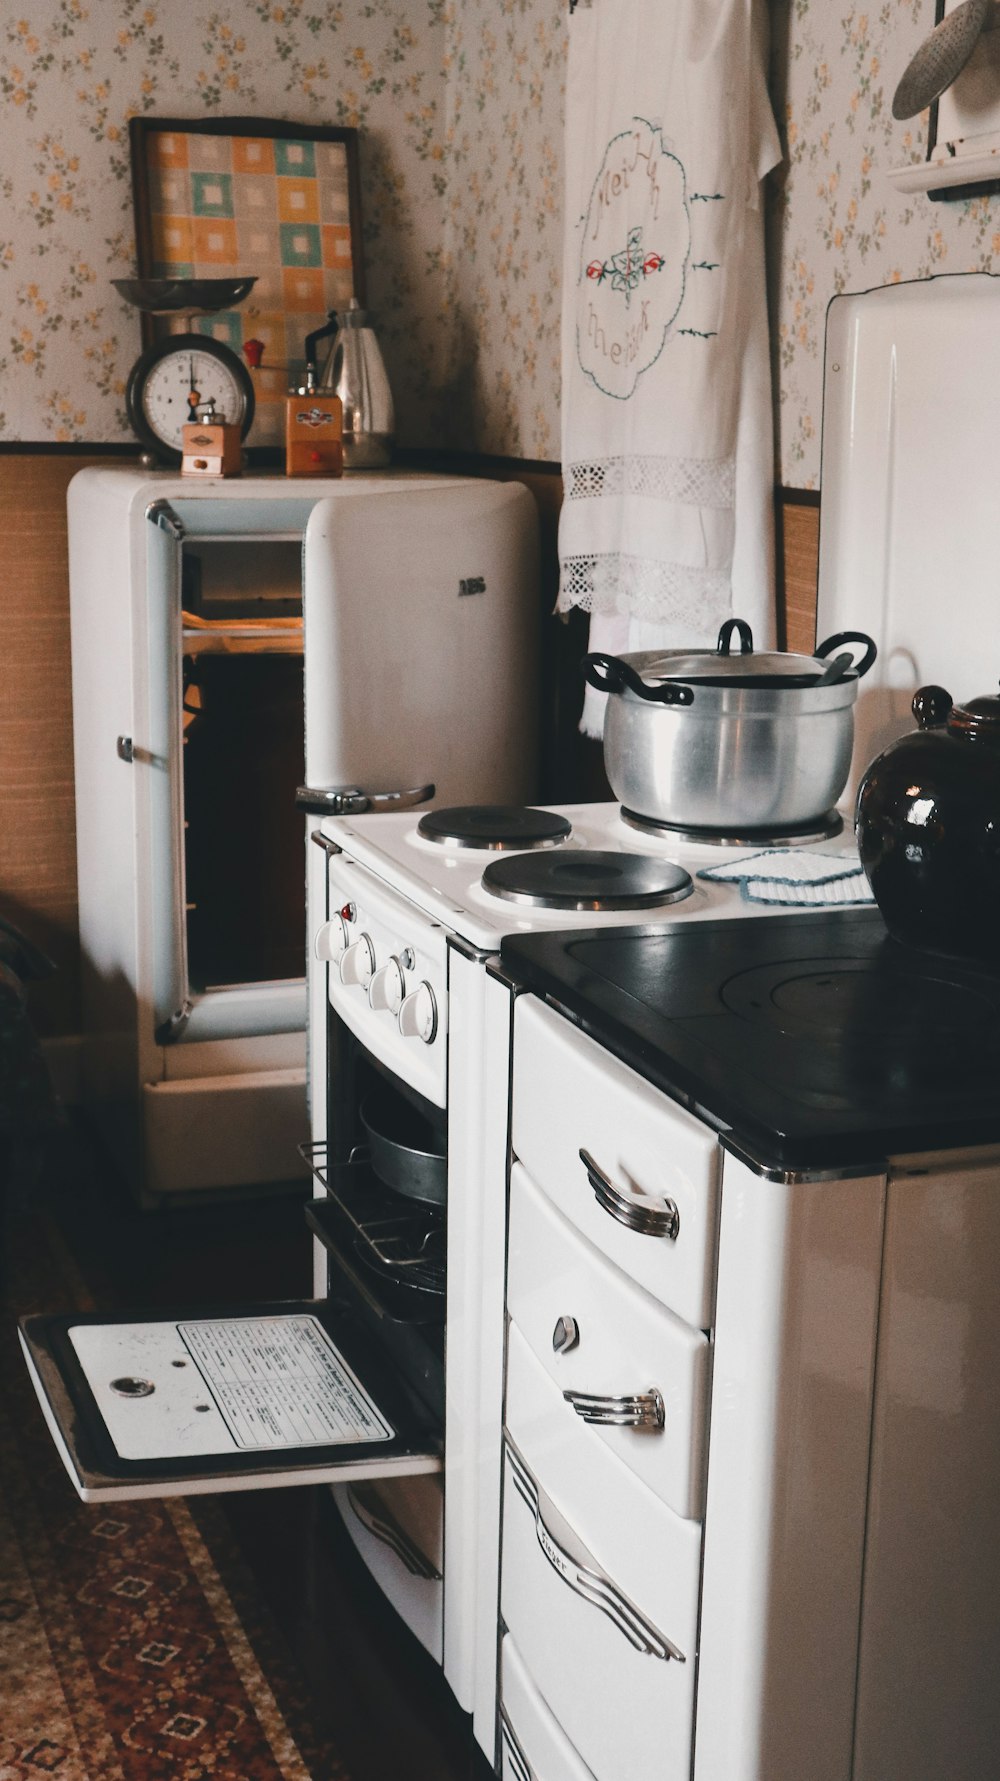 a stove top oven sitting next to a refrigerator